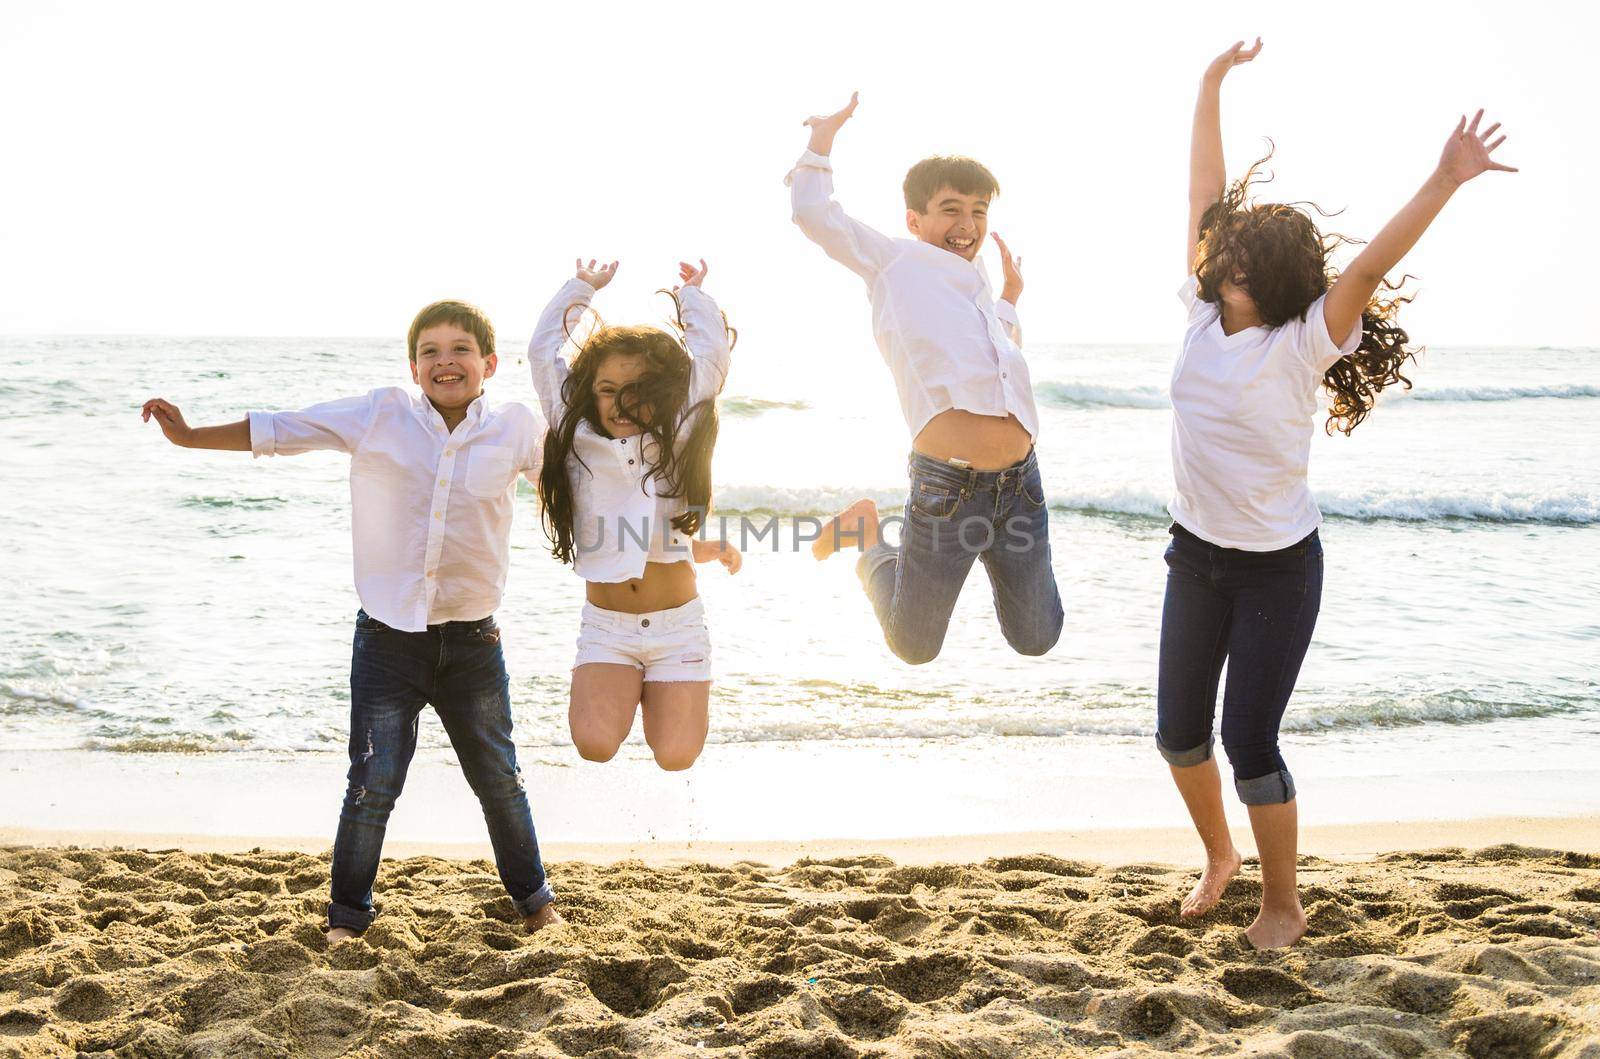 Happy kids jumping together with sunlight on the beach